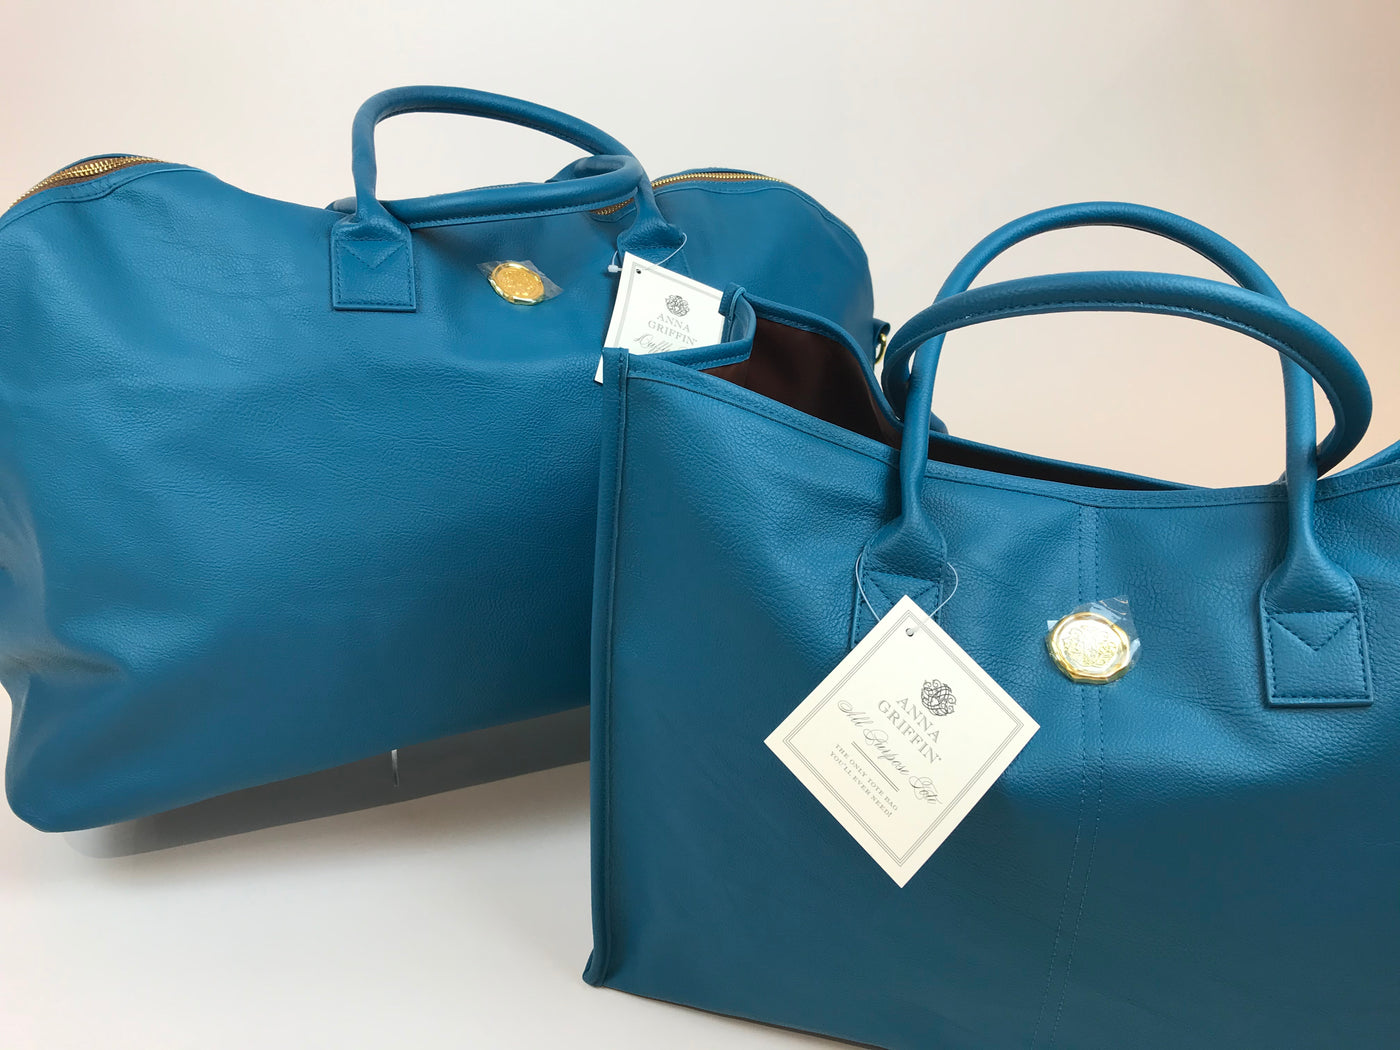 Peacock Blue Tote - SOLD OUT!